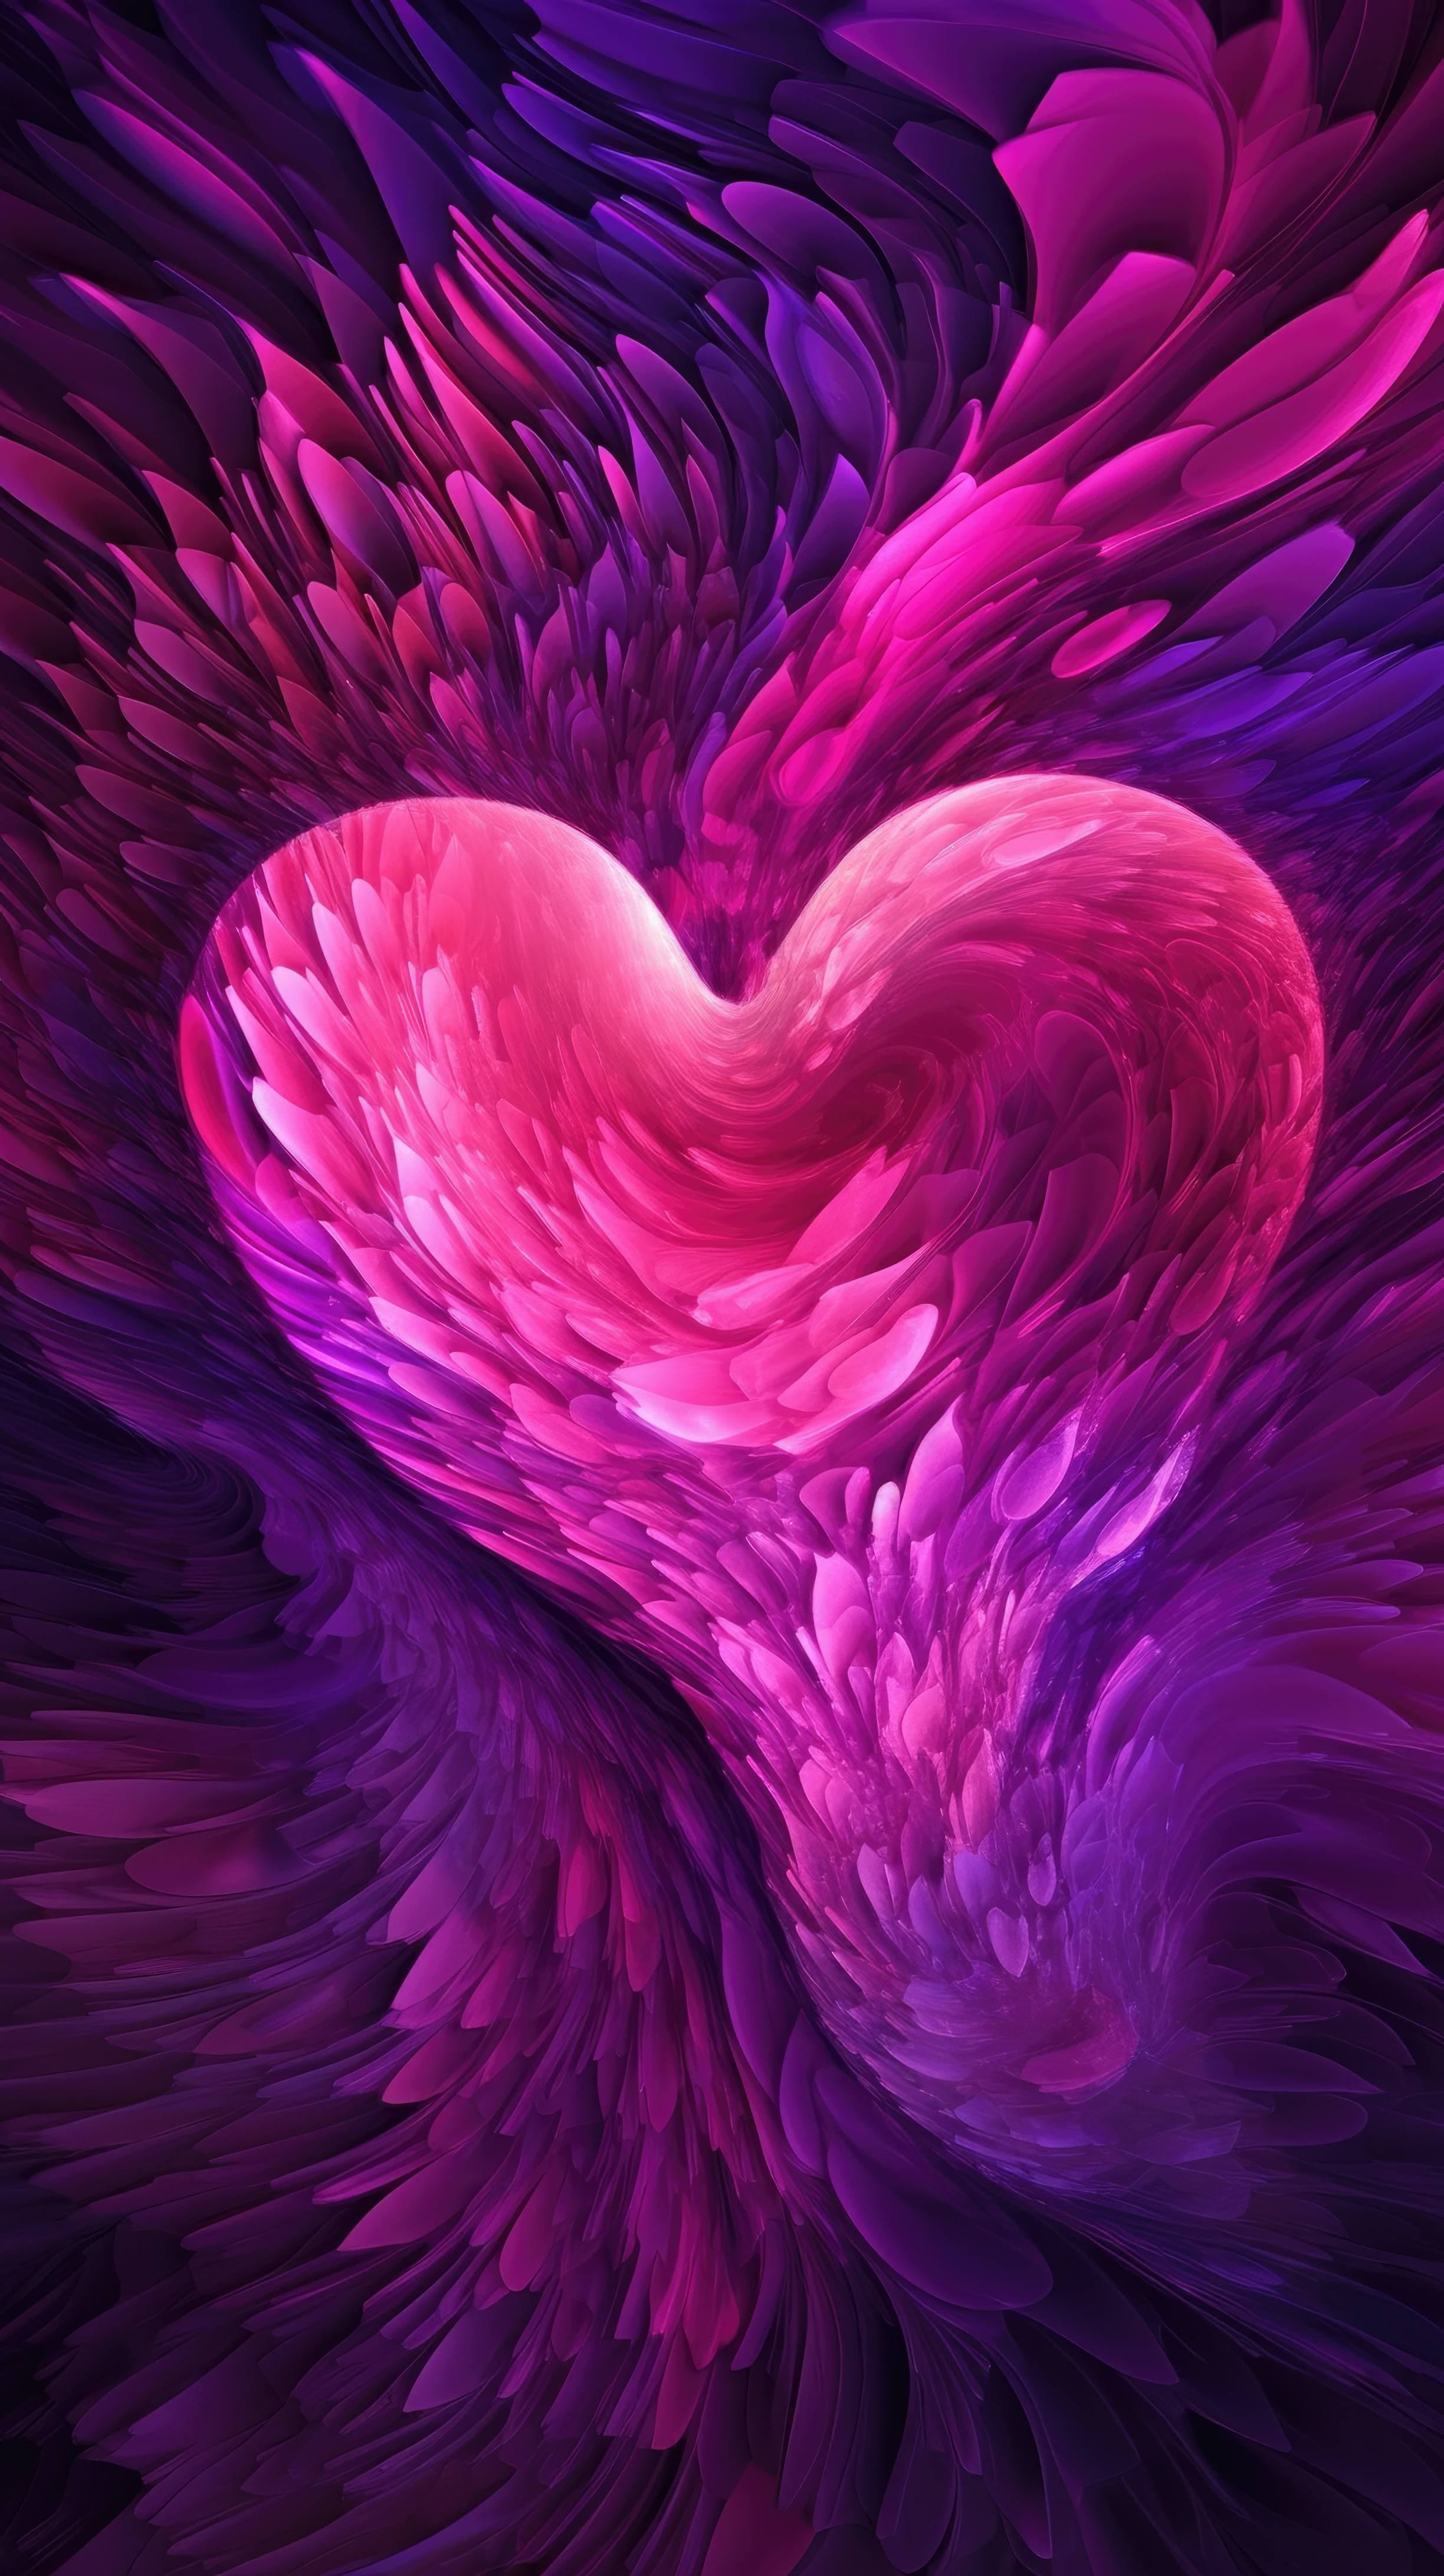 A 4K Ultra HD Mobile Wallpaper With An Abstract Heart Shaped Pattern In Shades Of Purple And Pink, With Swirling And Flowing Lines